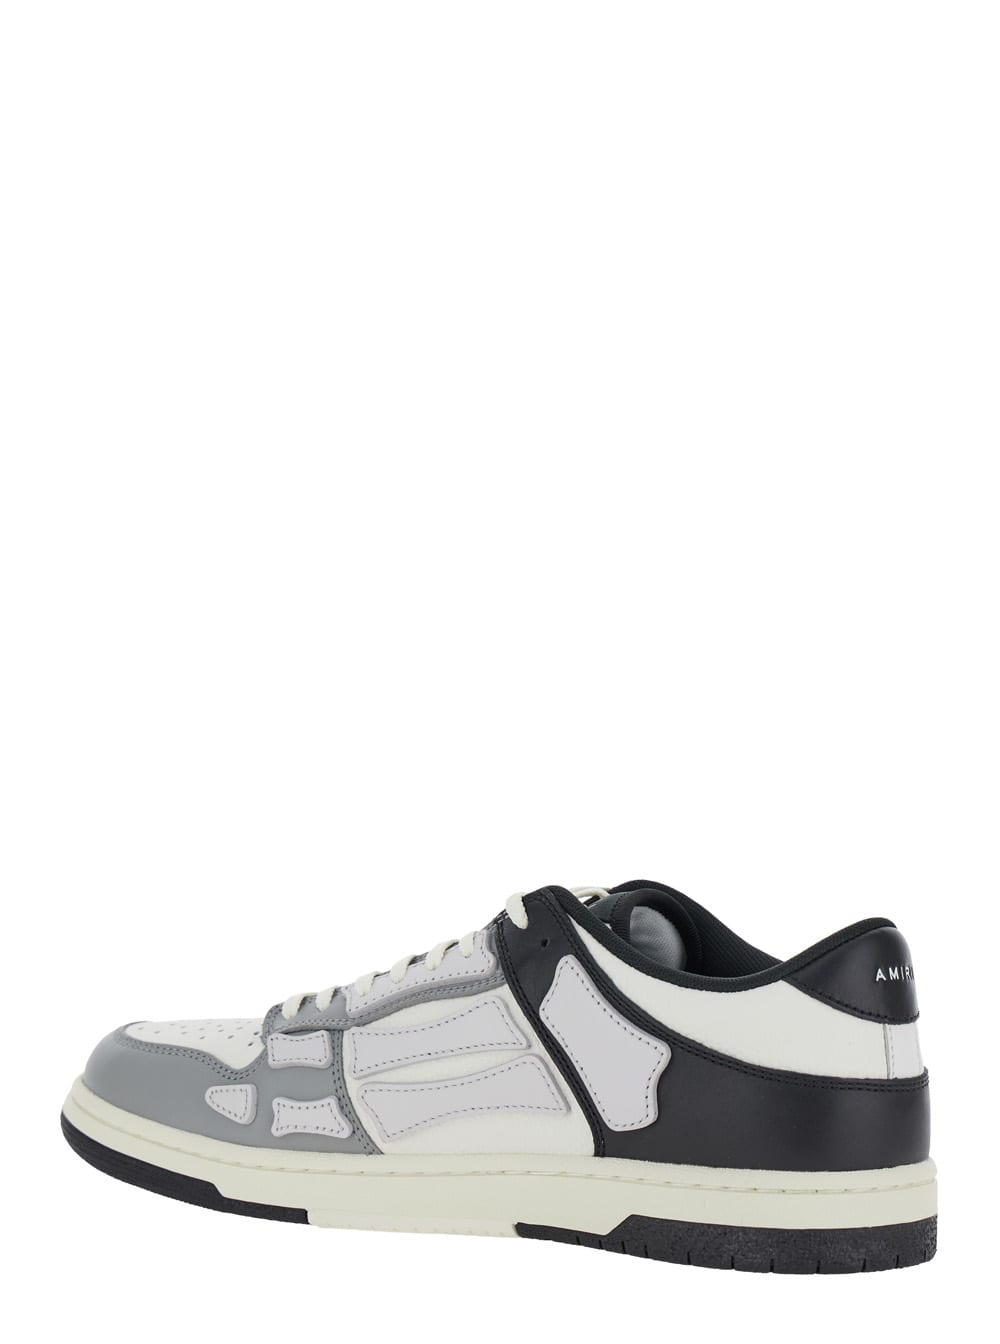 Shop Amiri Skel Top Low Grey And Black Bi-color Sneakers With Skeleton Patch In Leather Man